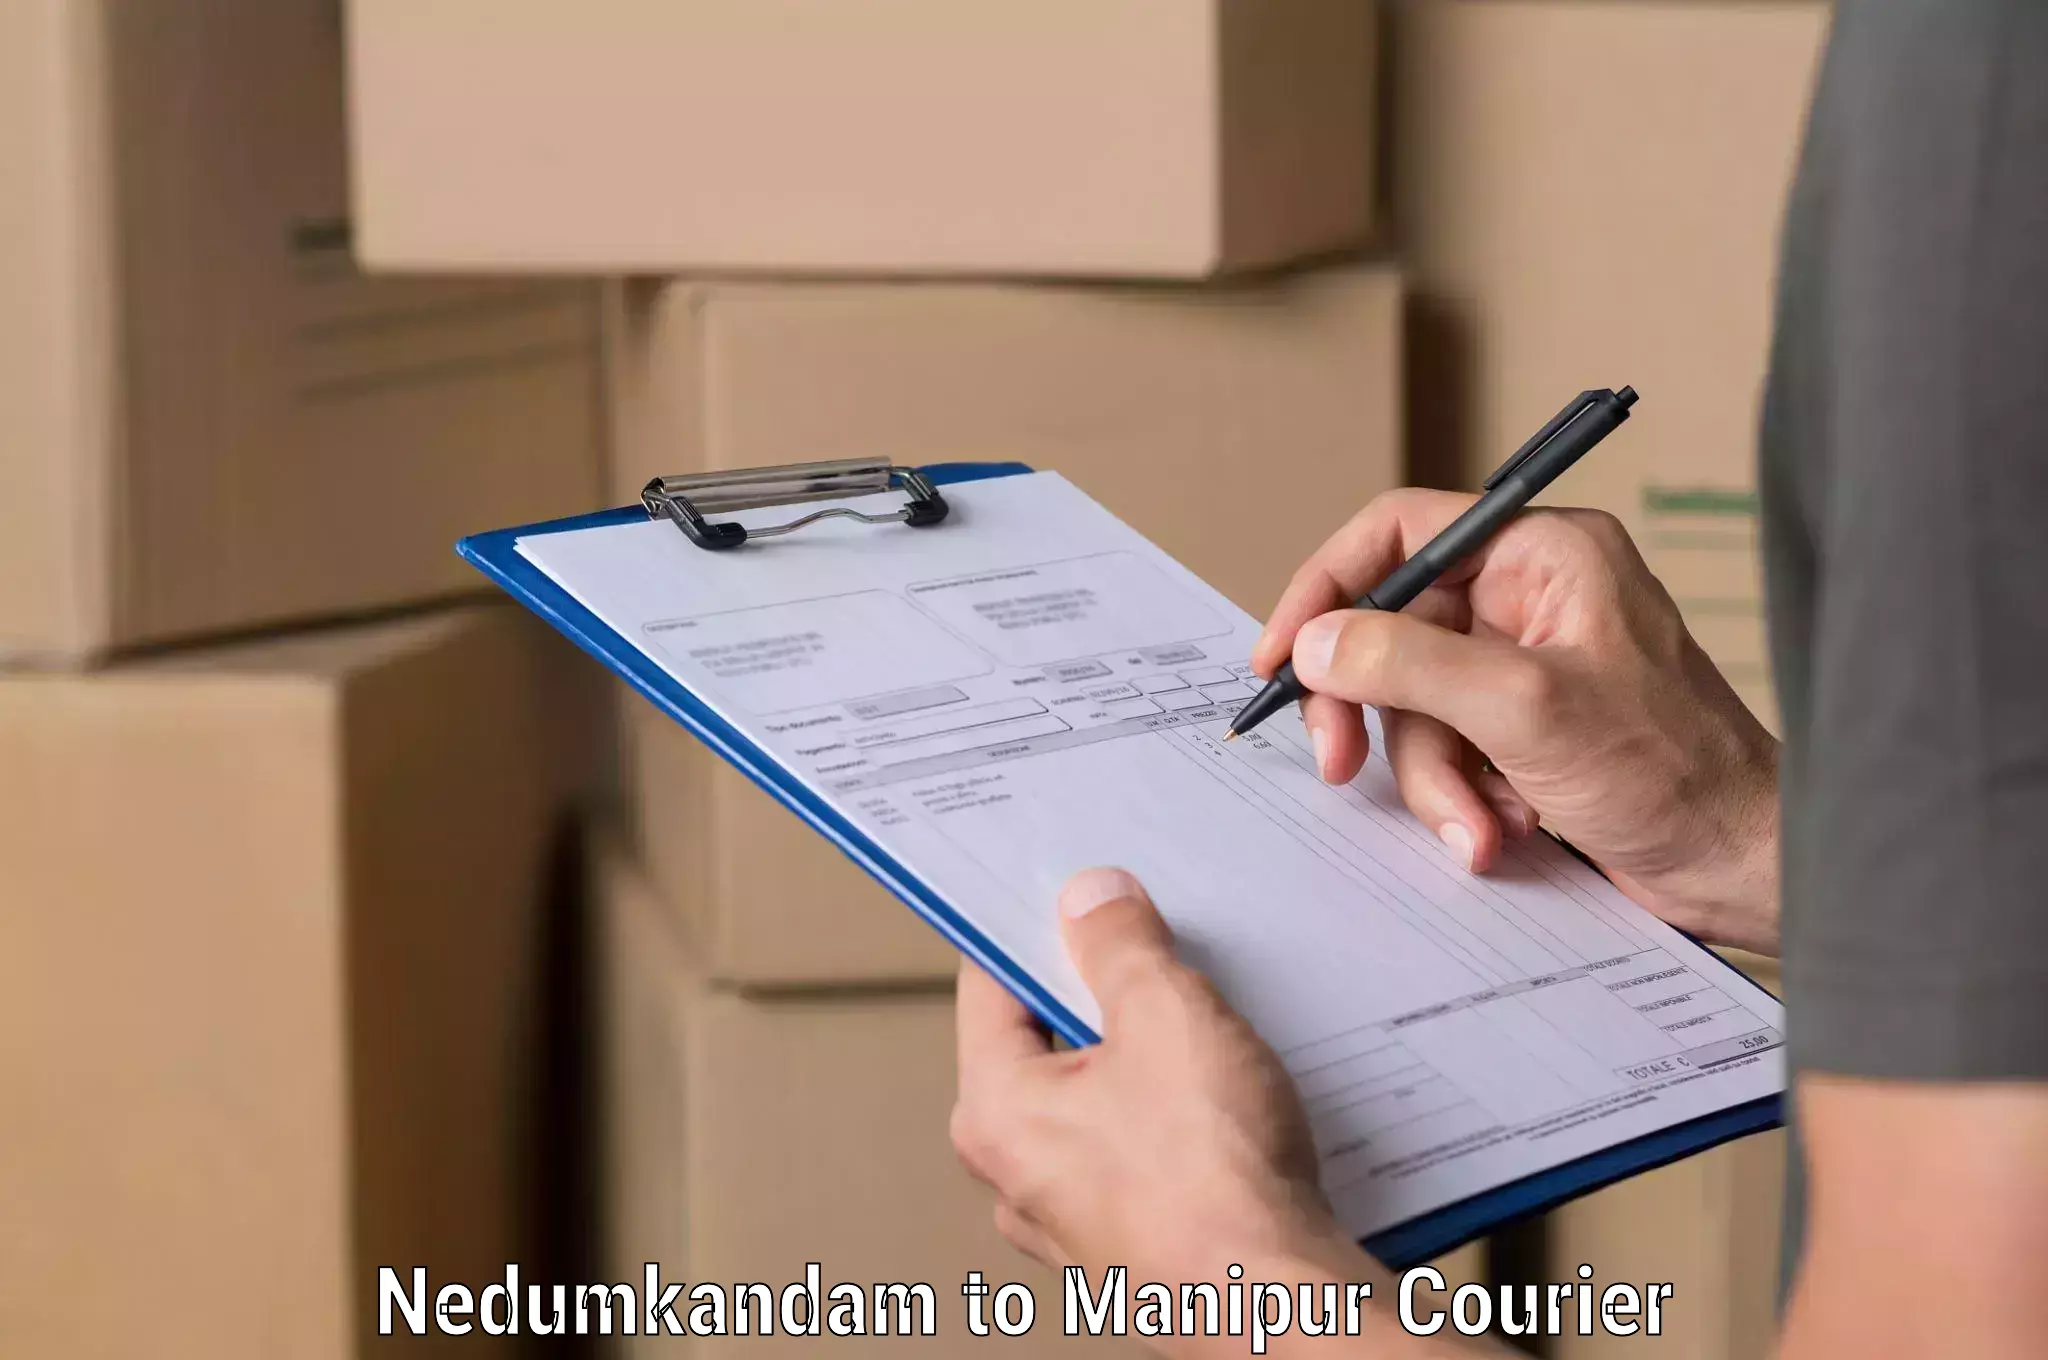 Optimized delivery routes in Nedumkandam to Imphal